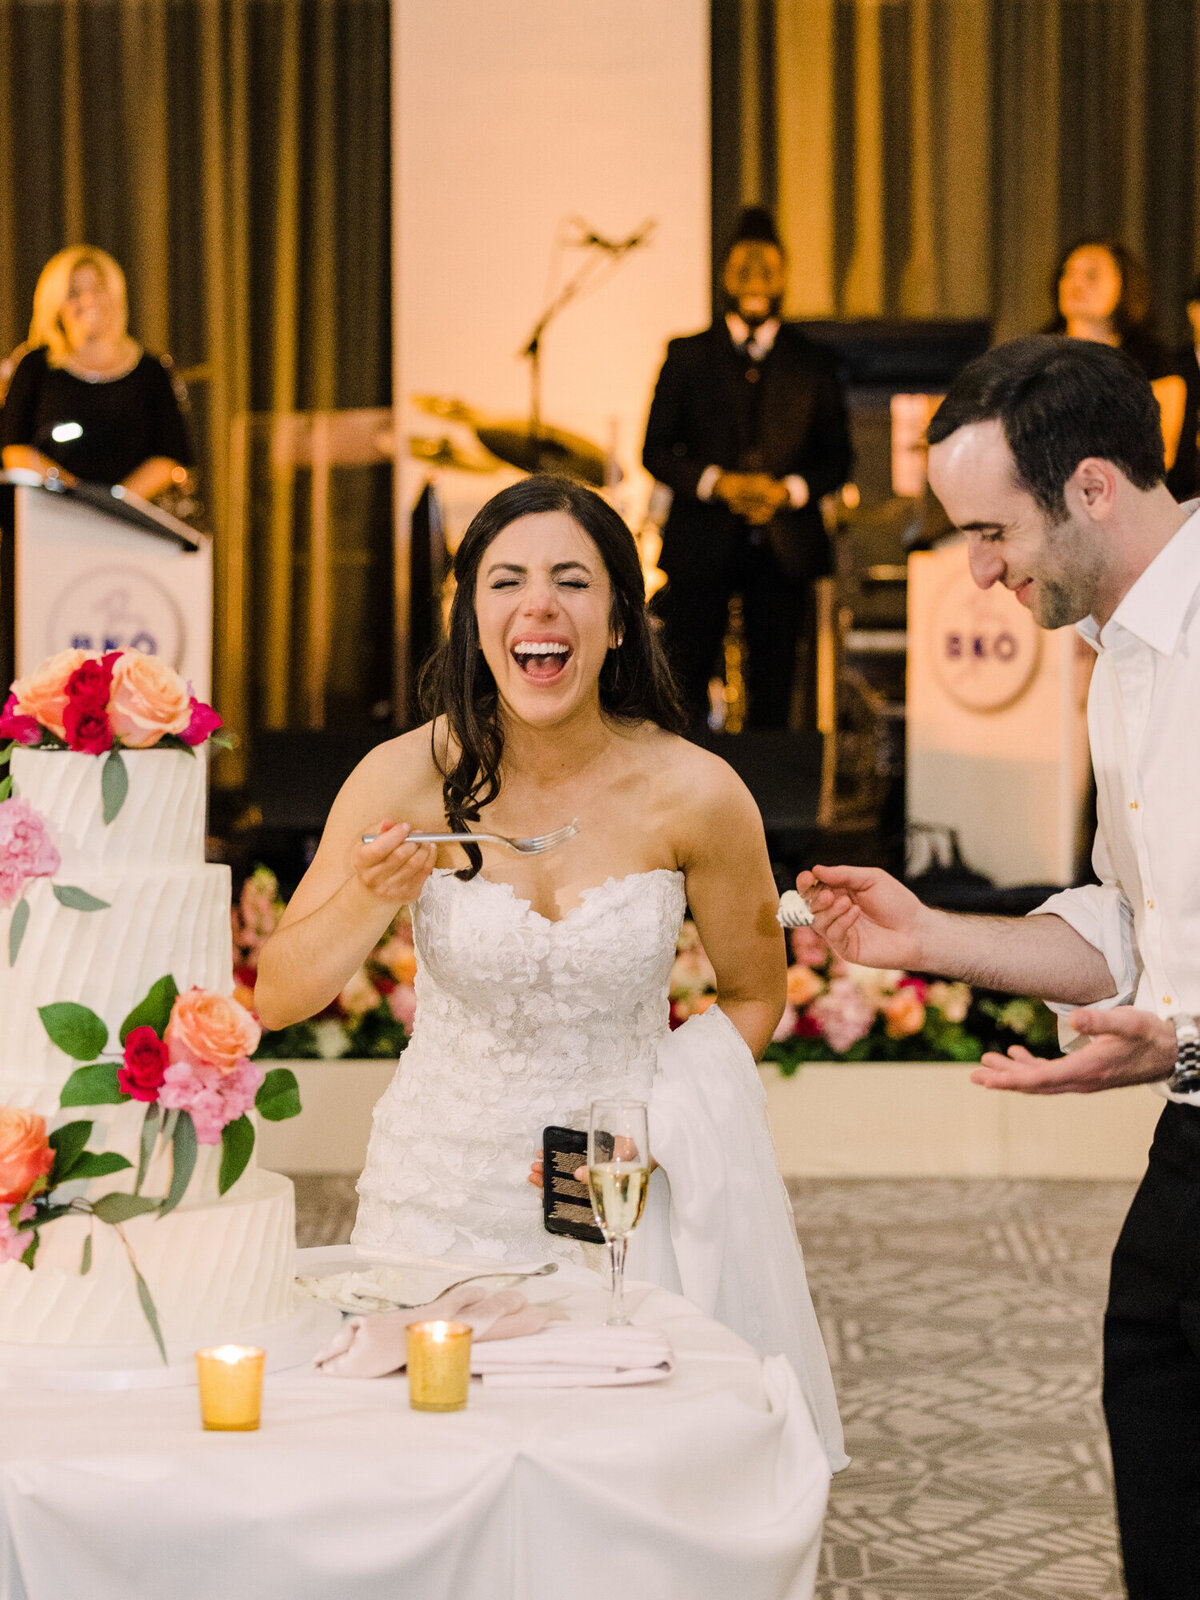 A couple shares a laugh as they cut their wedding cake